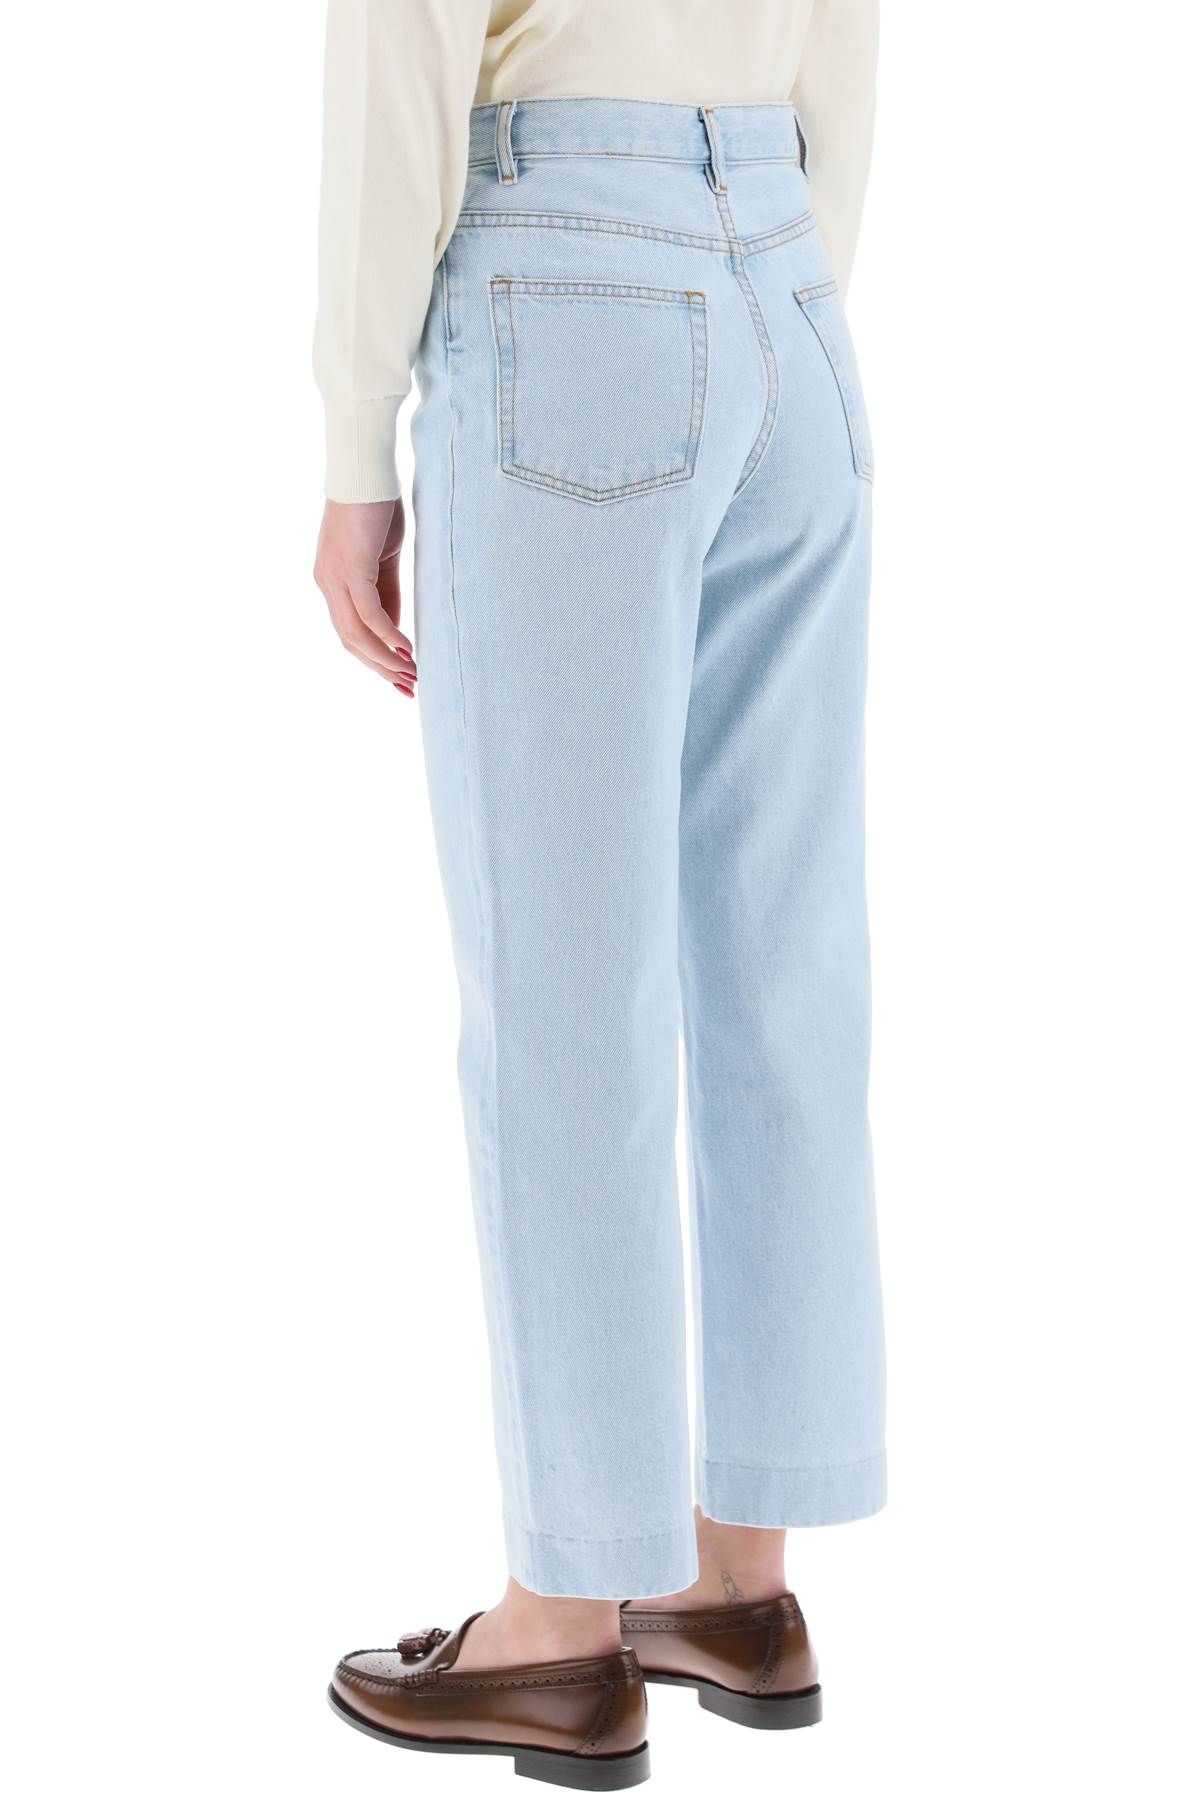 Shop Apc New Sailor Straight Cut Cropped Jeans In Light Blue